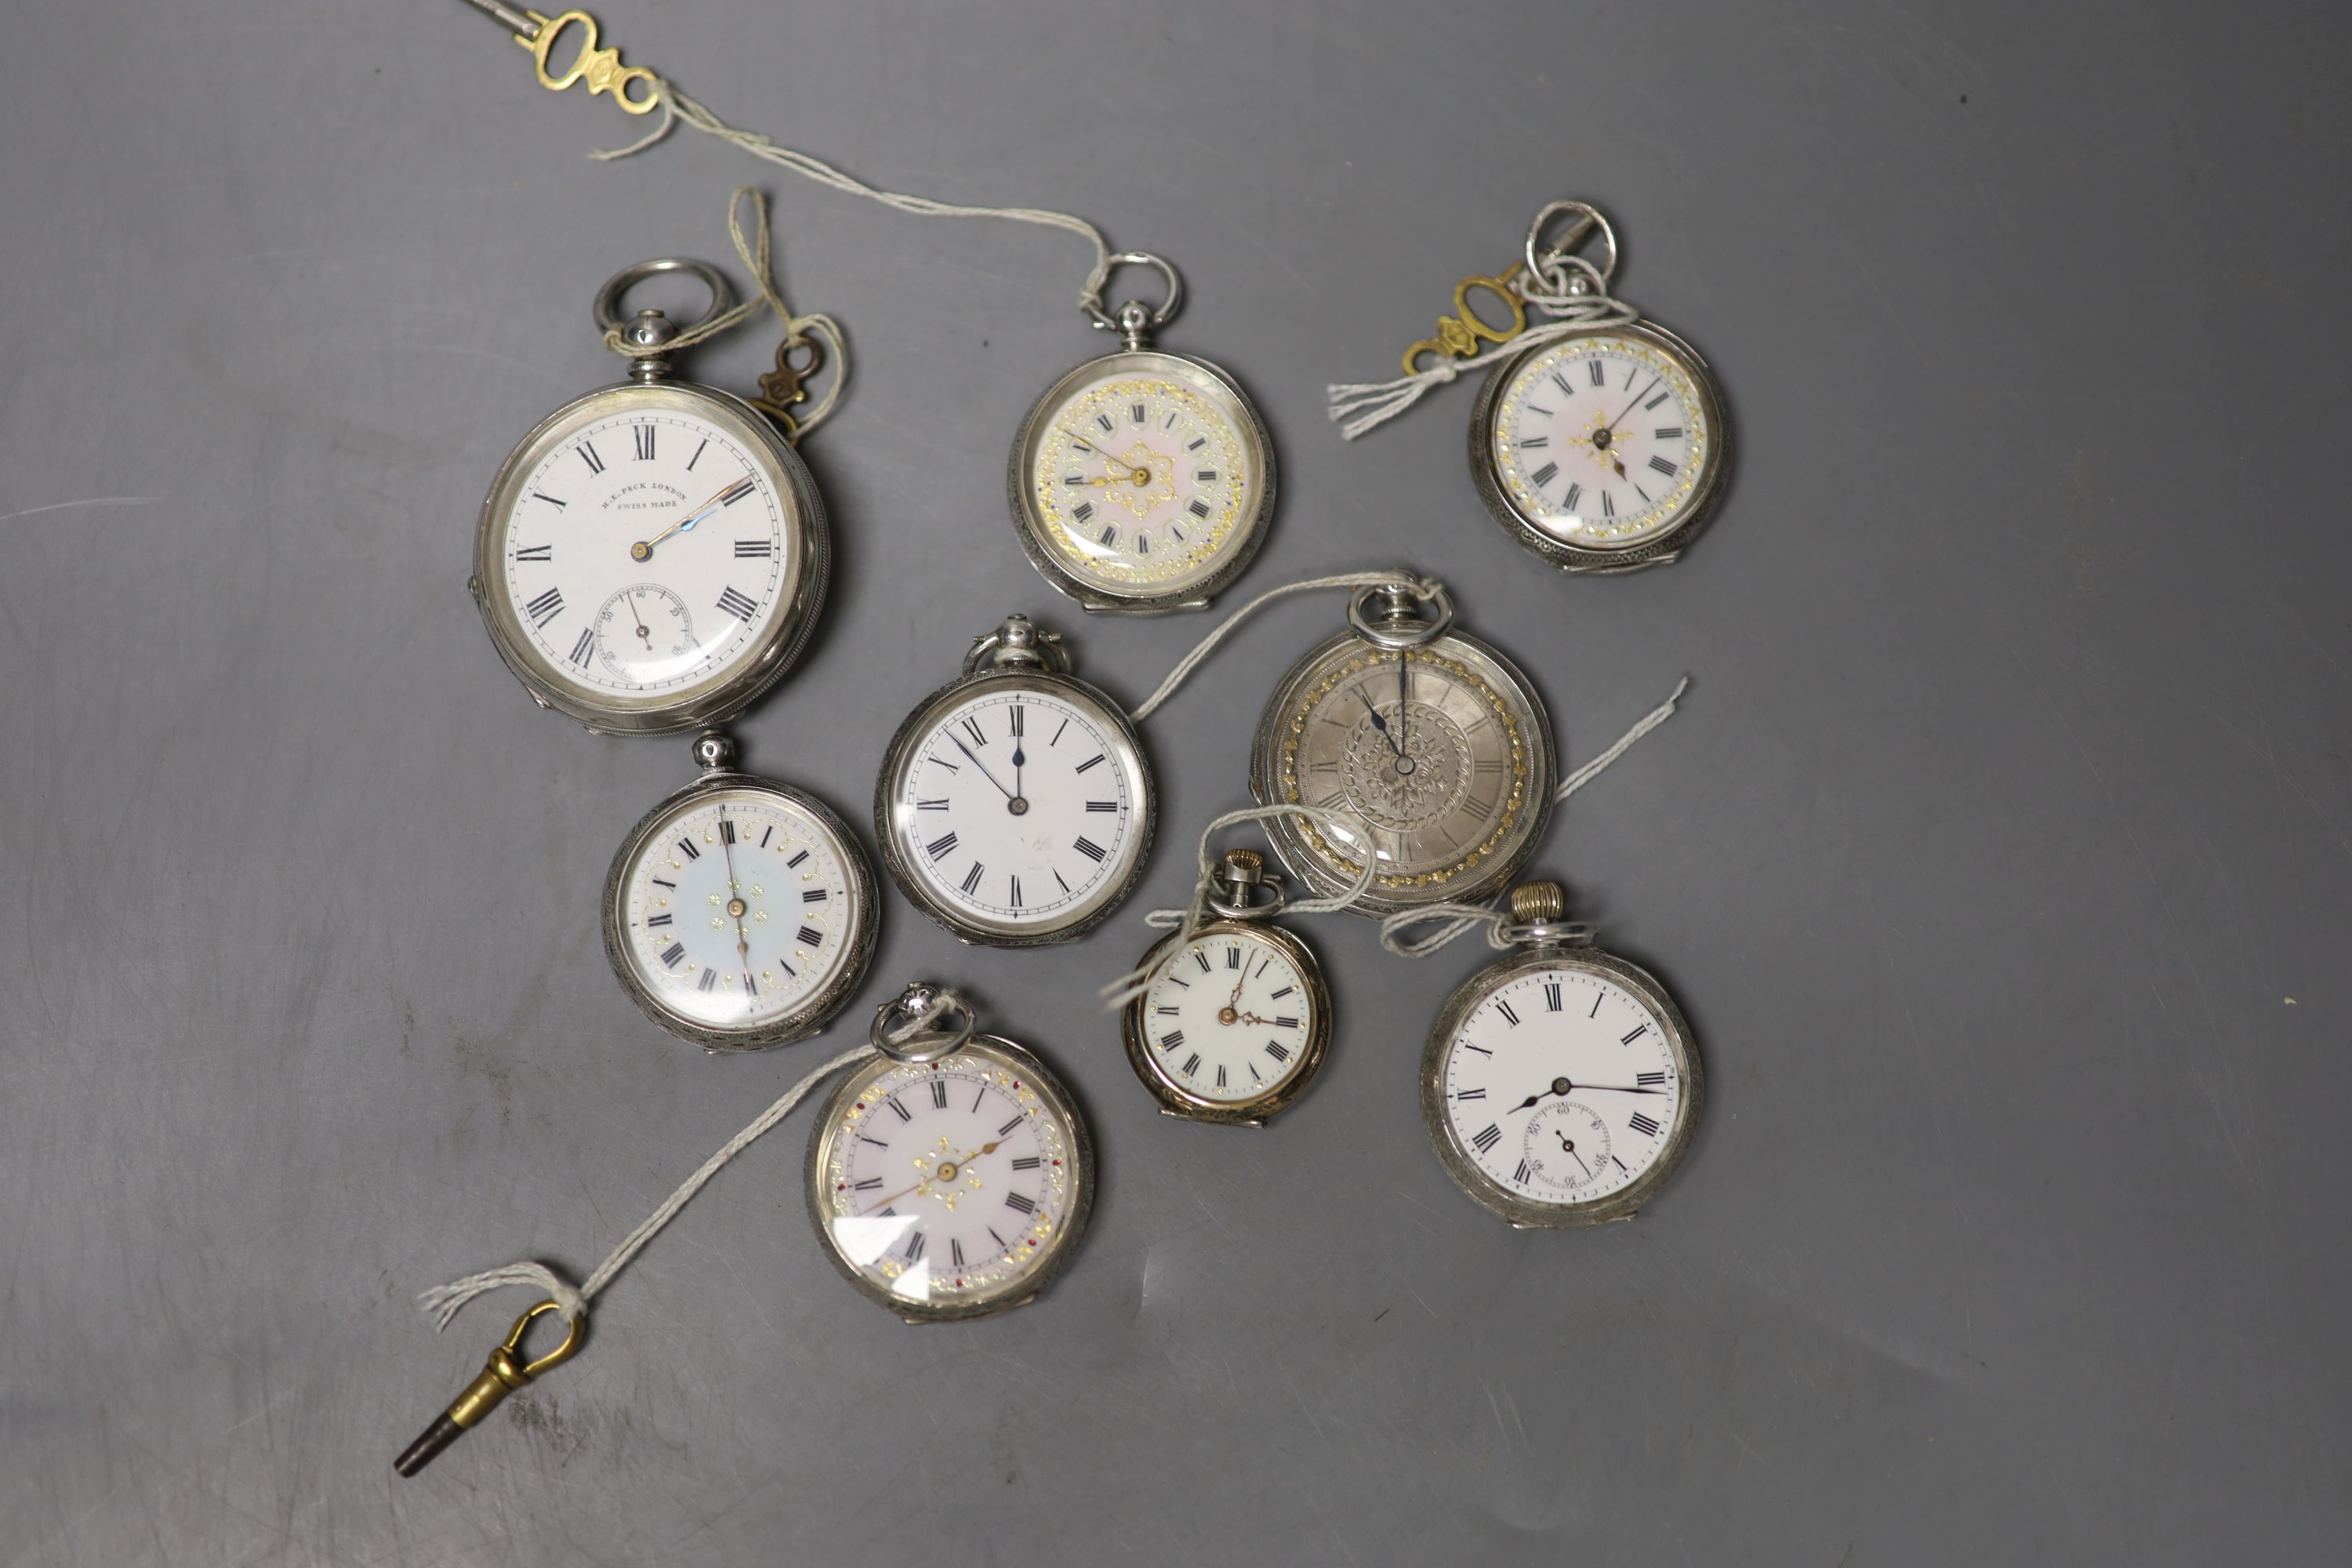 8 fob watches and a pocket watch.